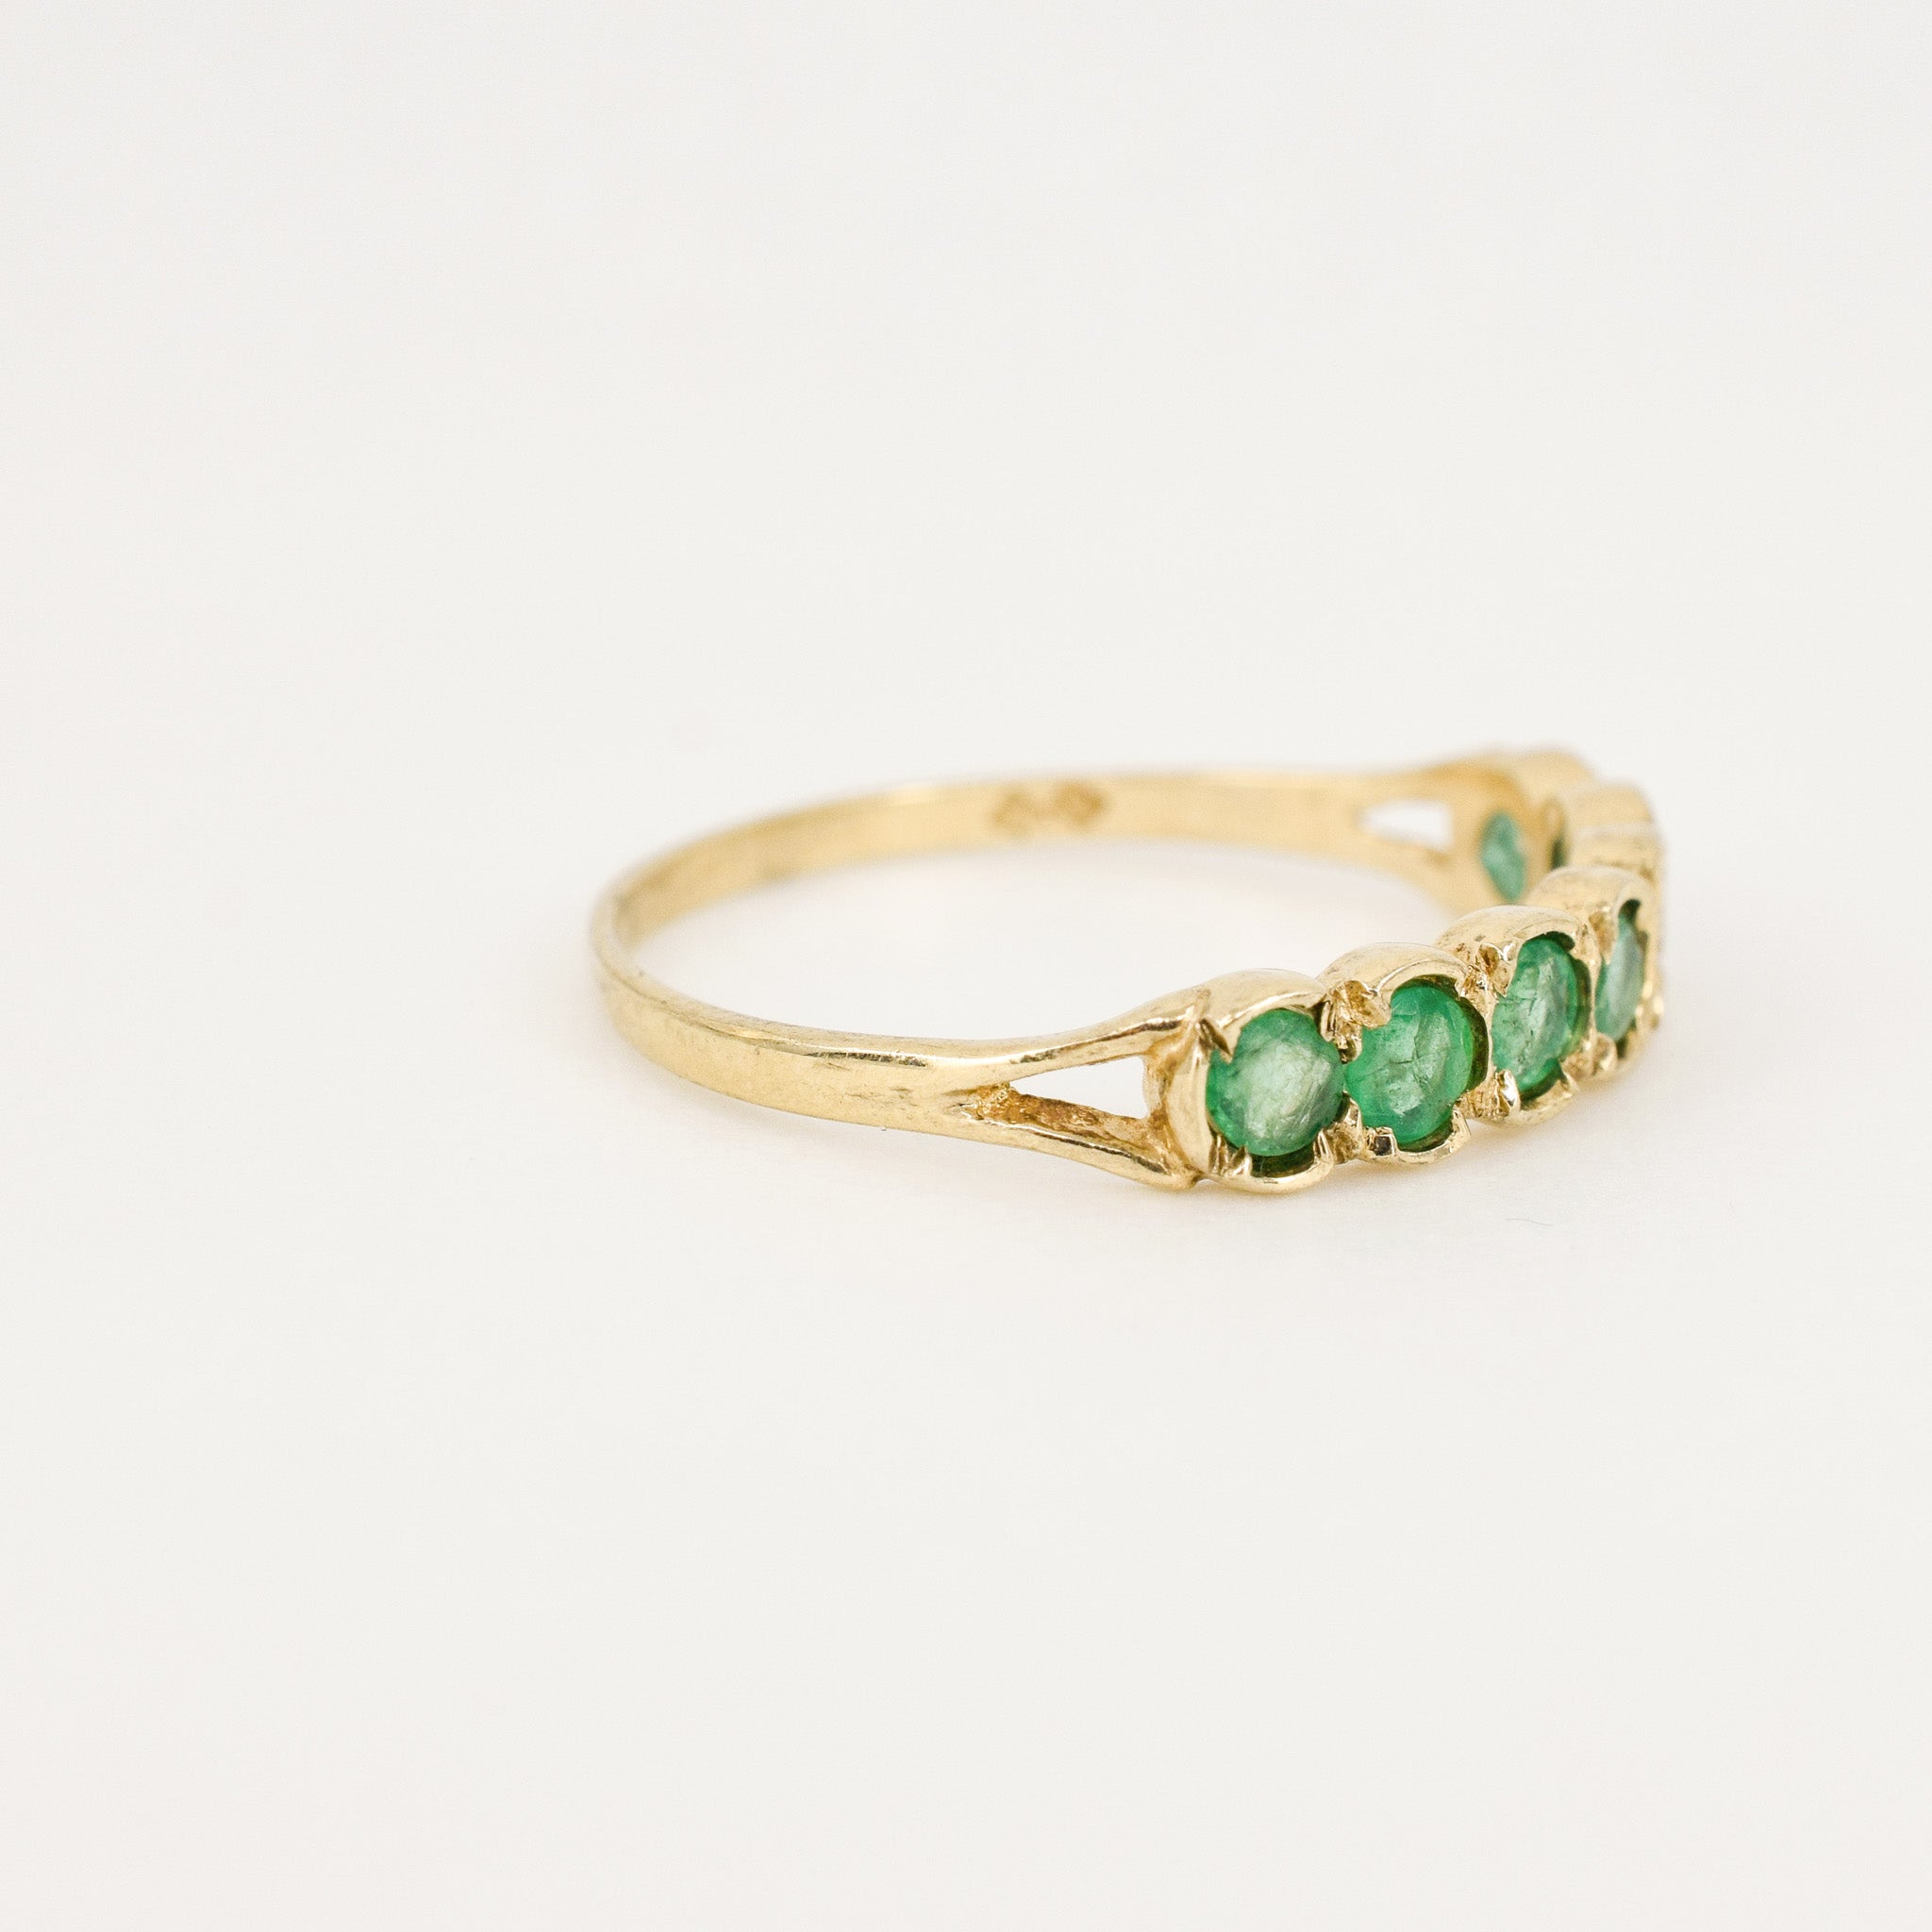 antique gold band with 7 emeralds, folklor vintage jewelry canada